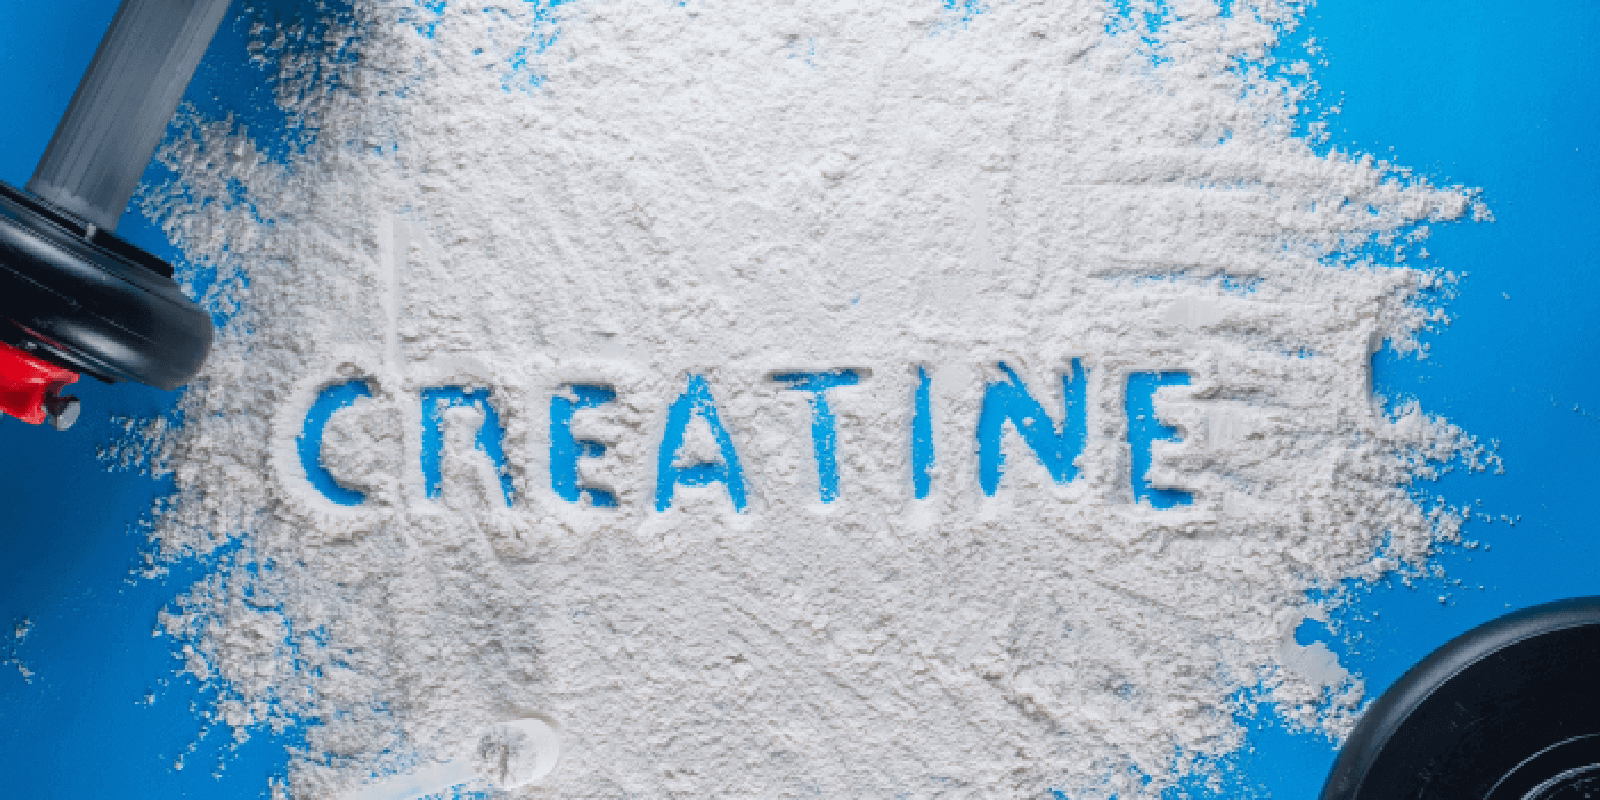 Overview of Creatine: Uses, Side Effects & More